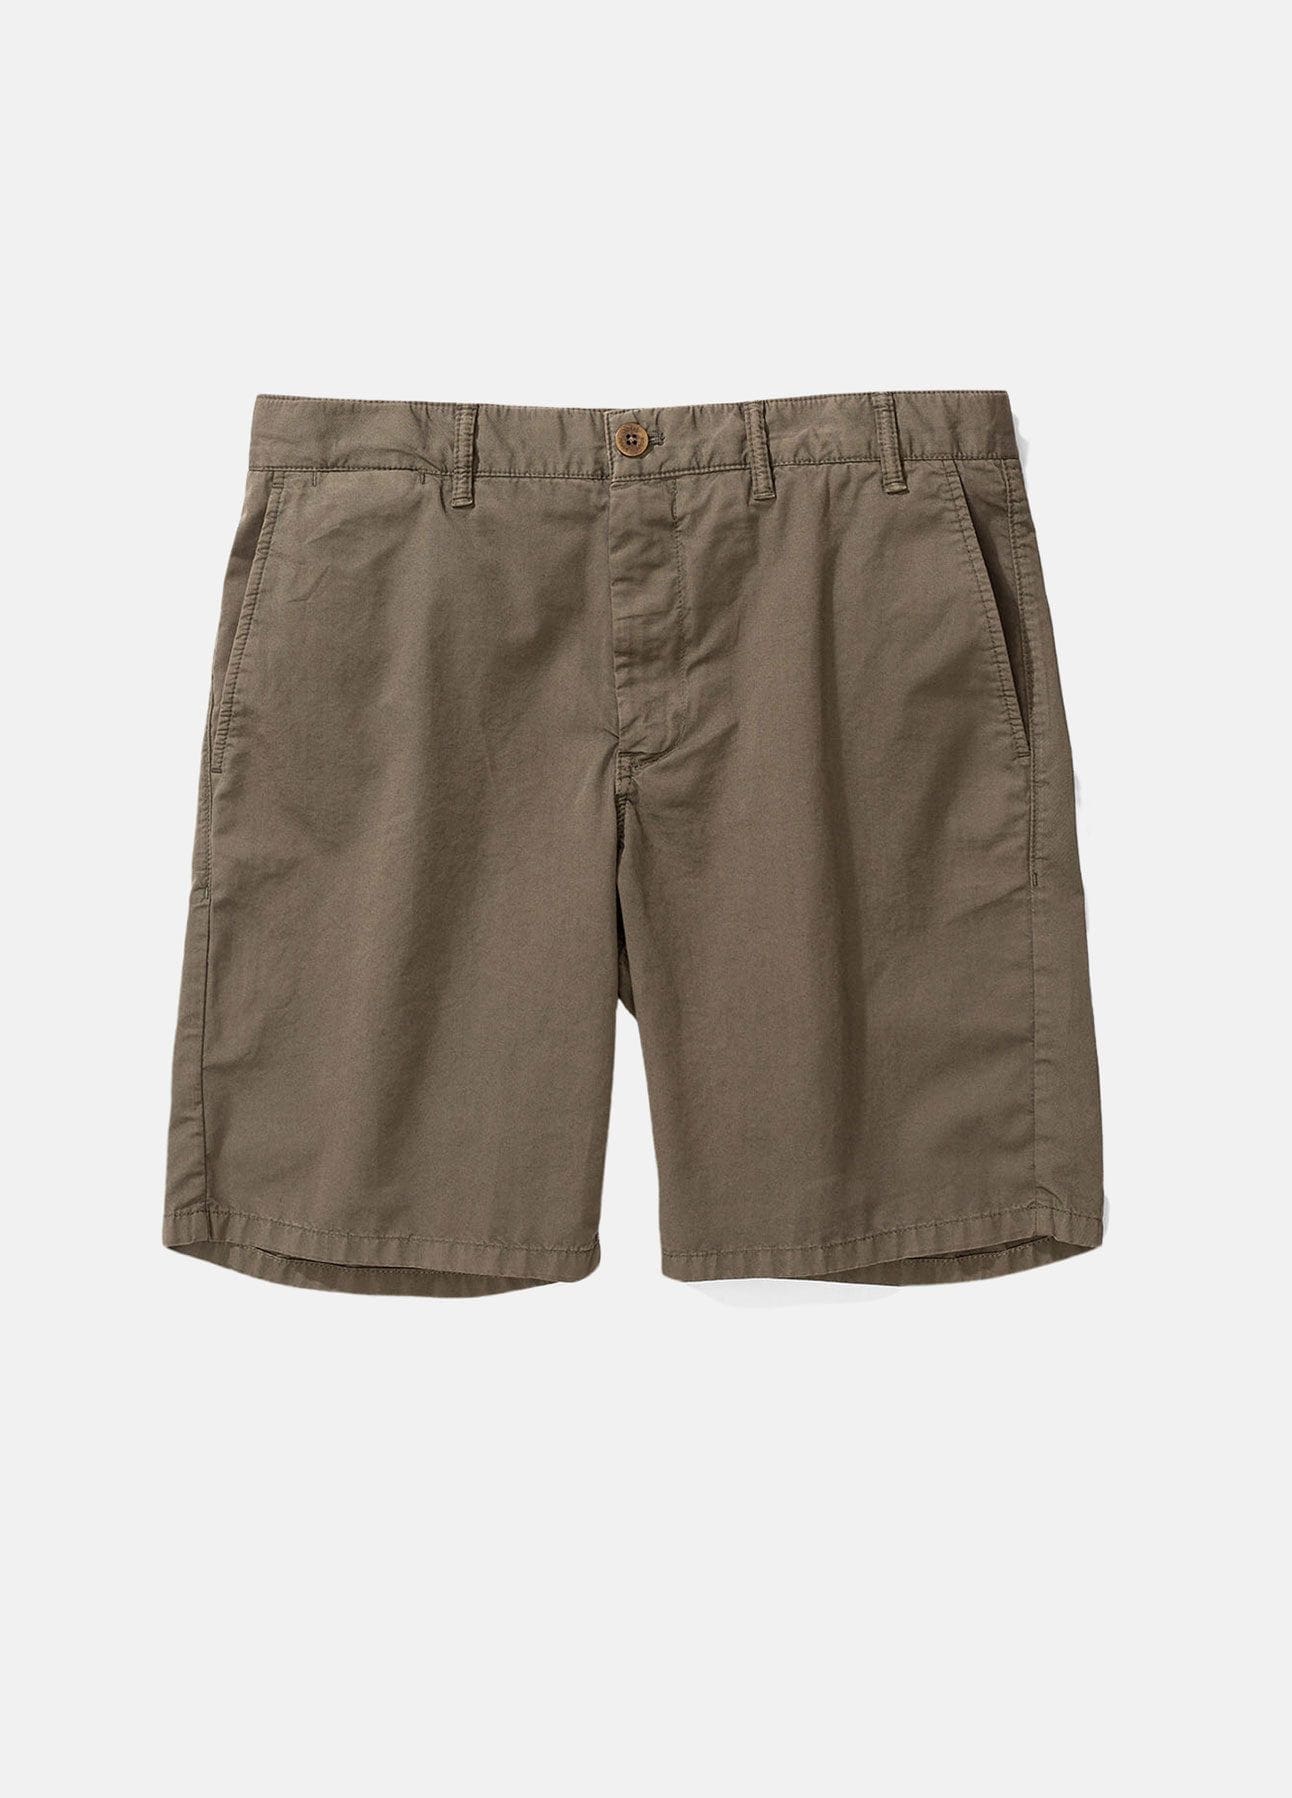 grøn aros light twill shorts fra norse projects